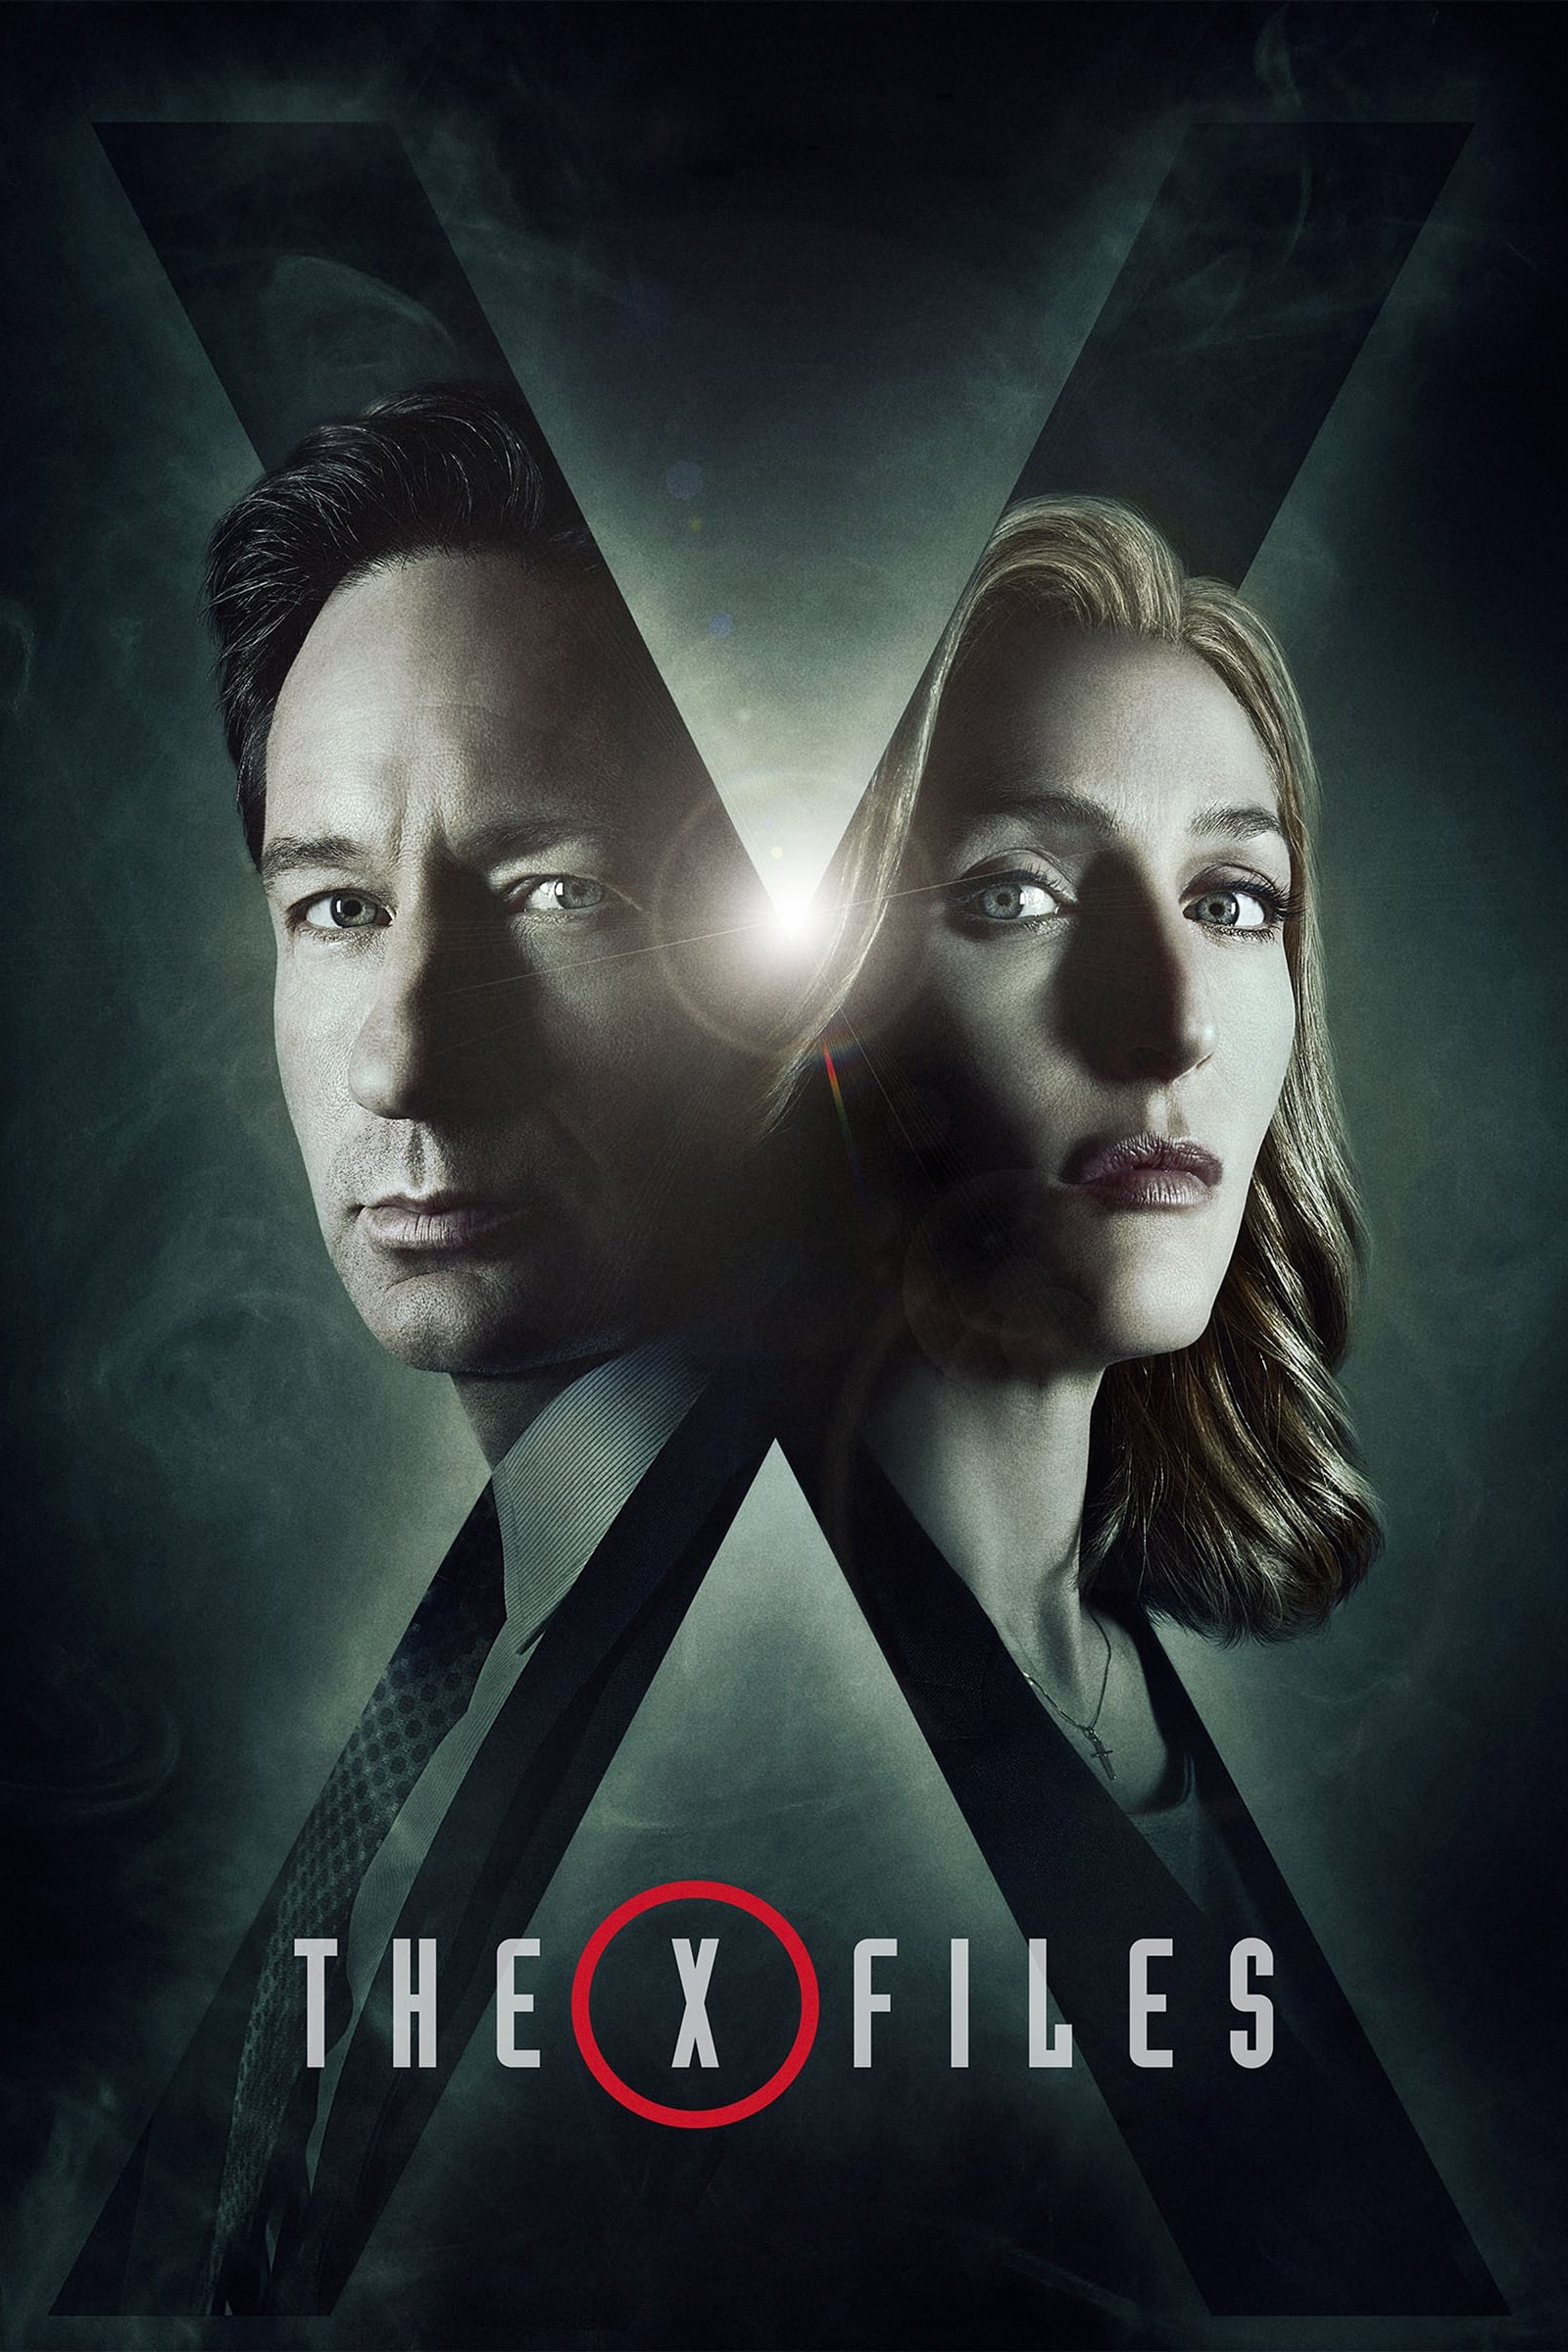 The X Files rating